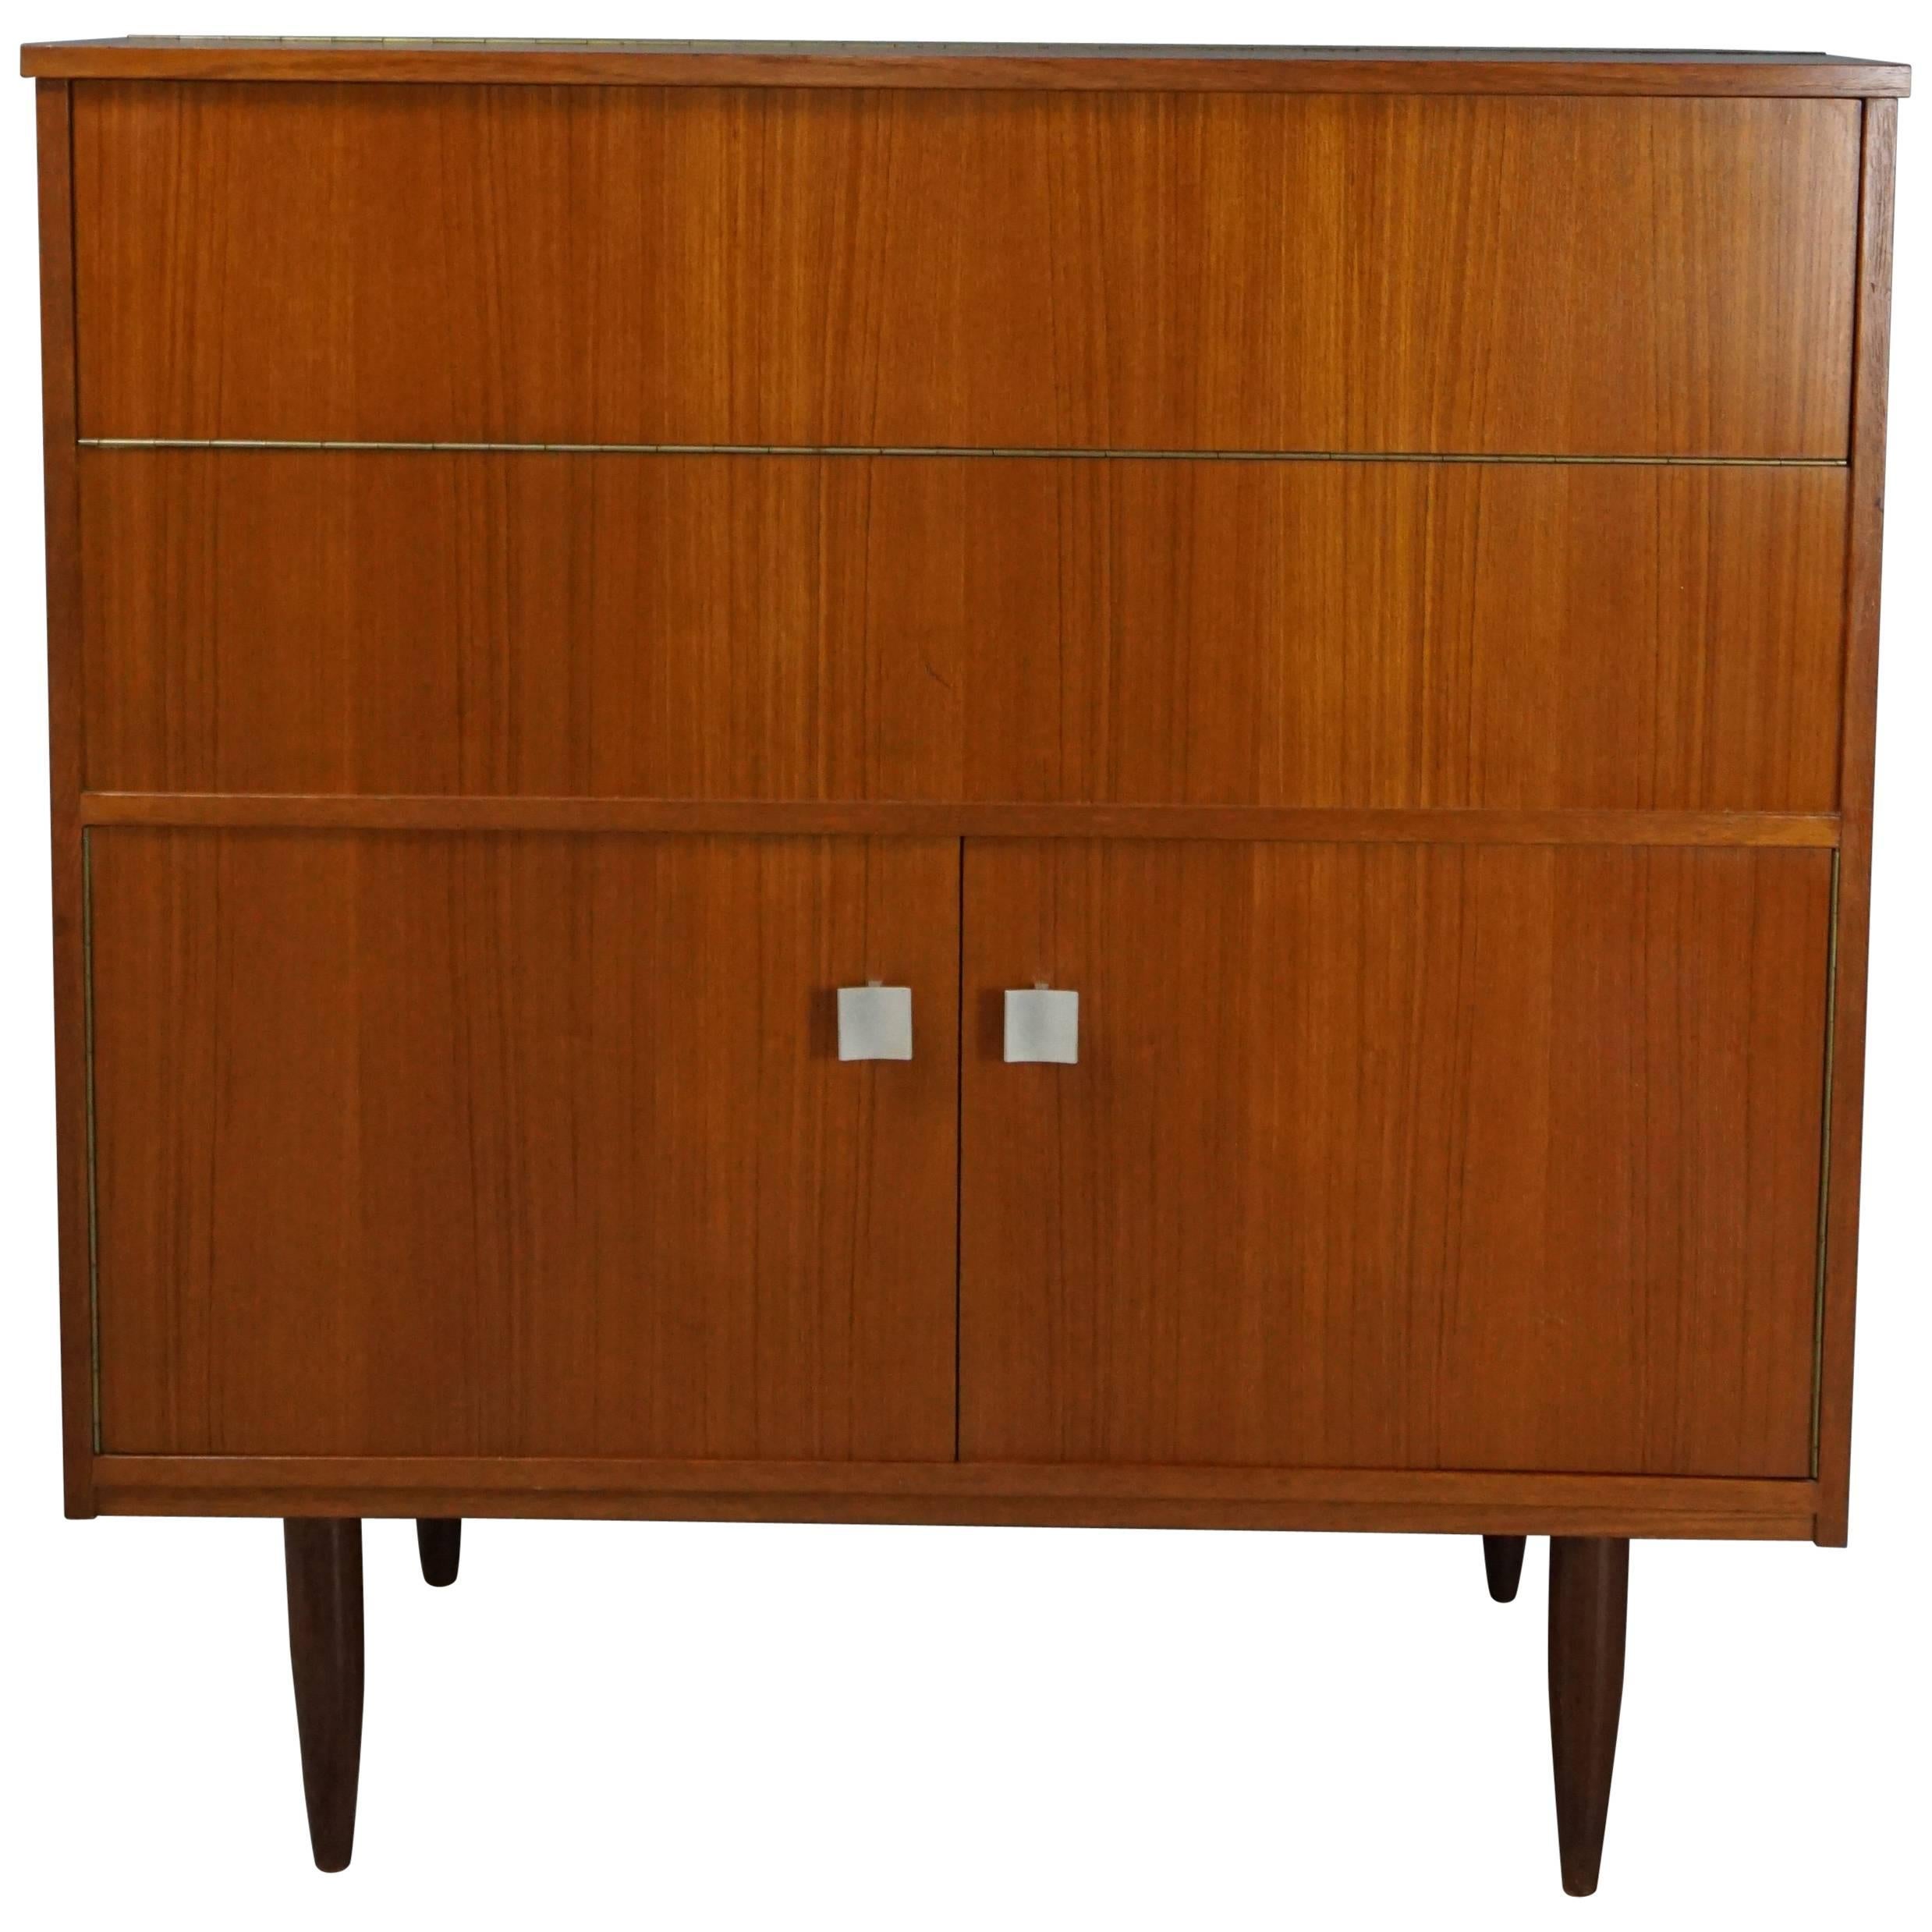 Ceraùic and Wooden Teak Bar Cabinet from the 1960s